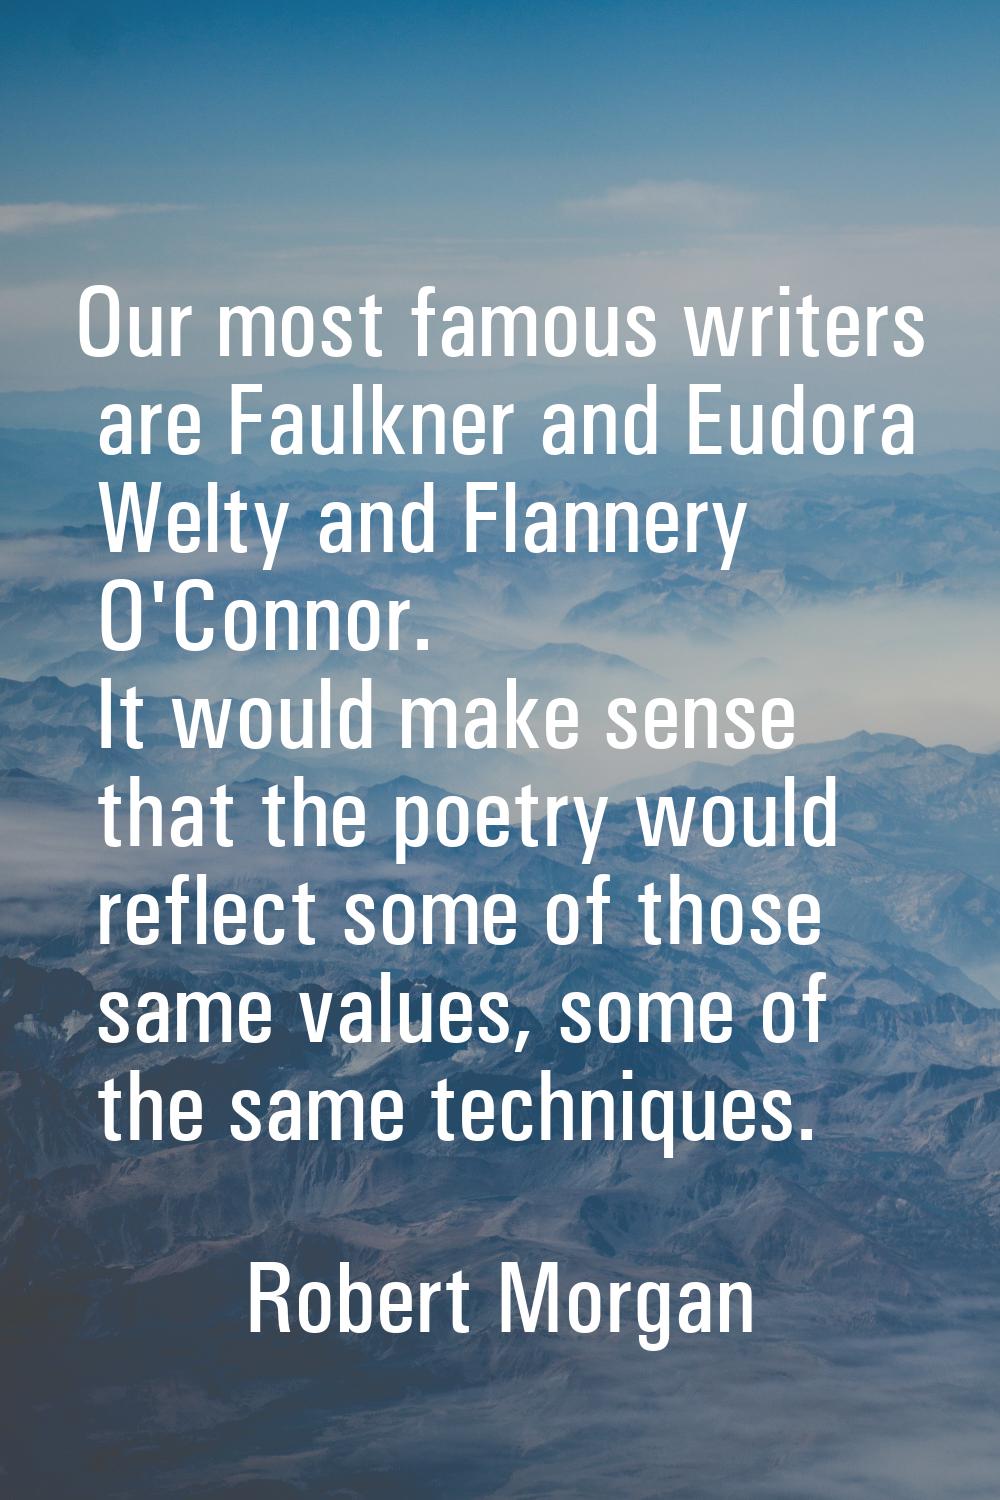 Our most famous writers are Faulkner and Eudora Welty and Flannery O'Connor. It would make sense th